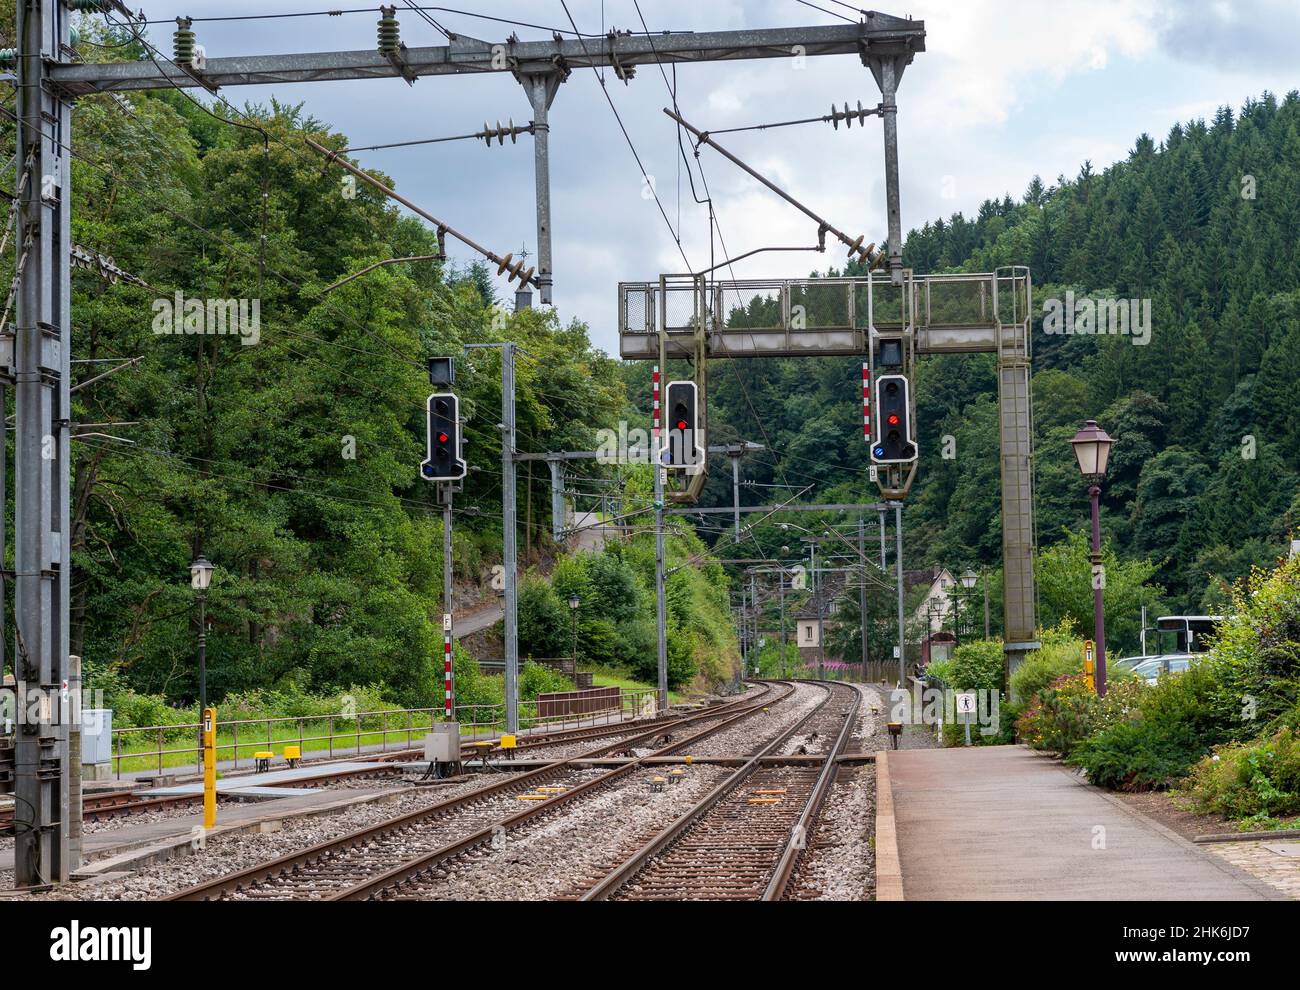 Clervaux, Luxembourg - view of railway approach to the railway station Stock Photo